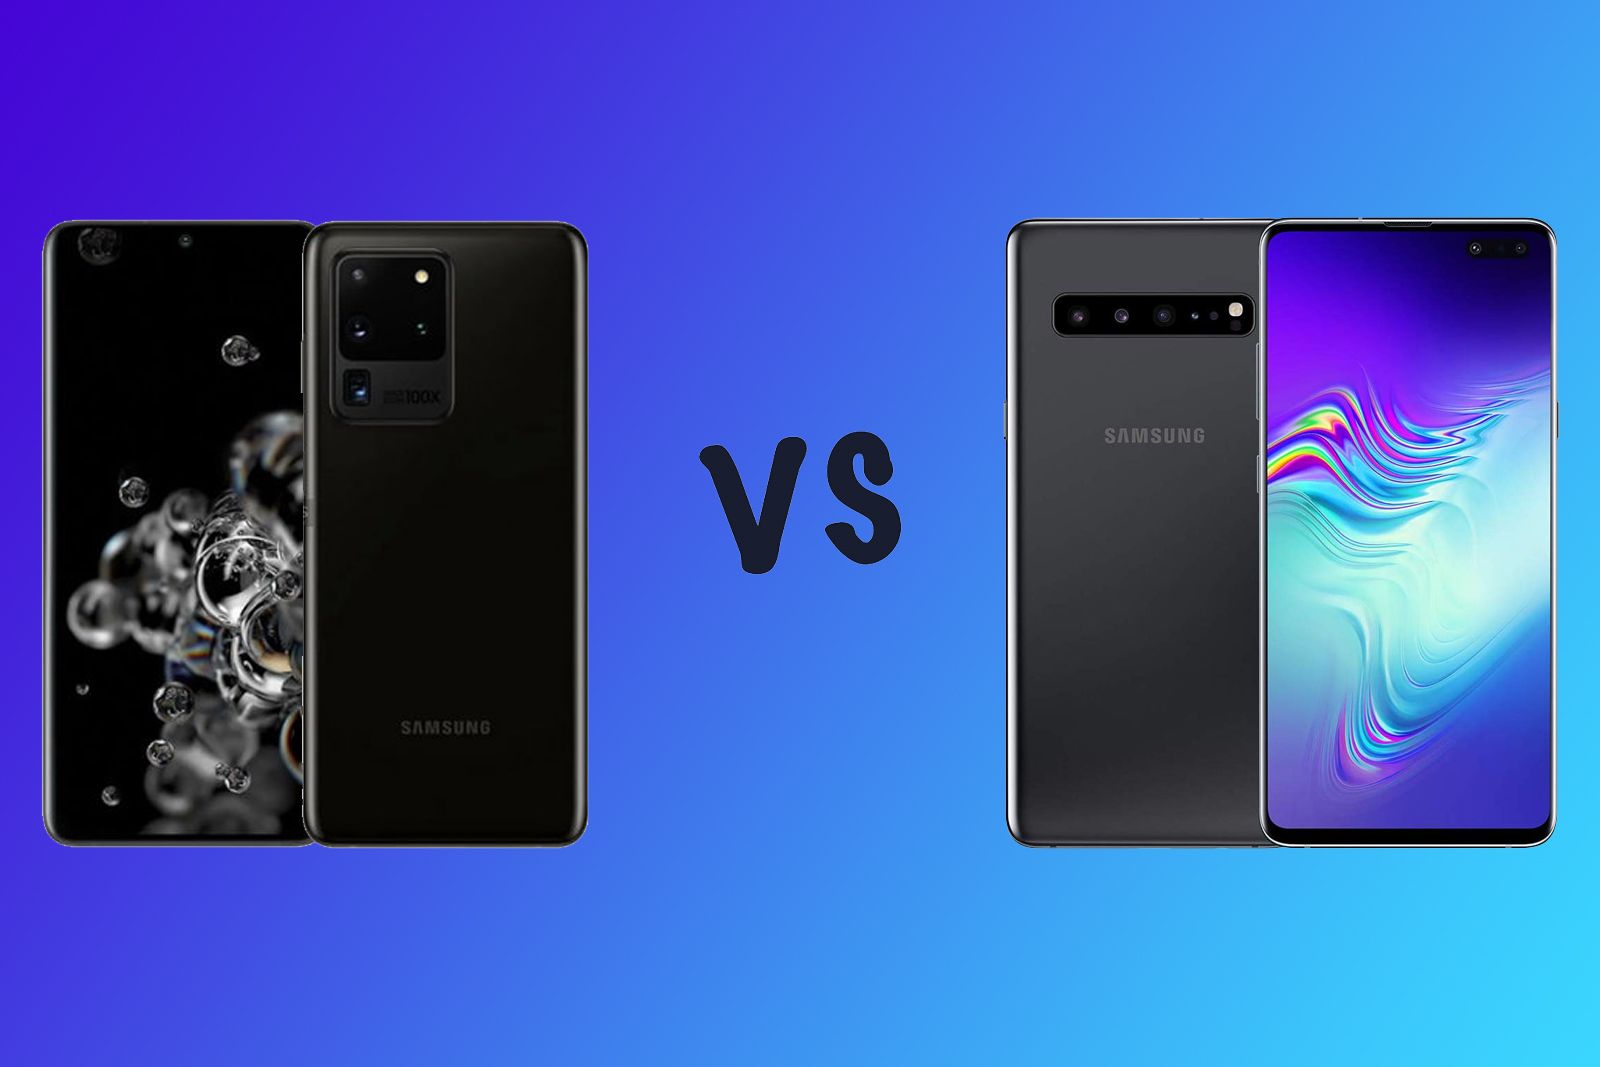 Samsung Galaxy S20 Ultra vs Galaxy S10 5G Whats the difference image 1